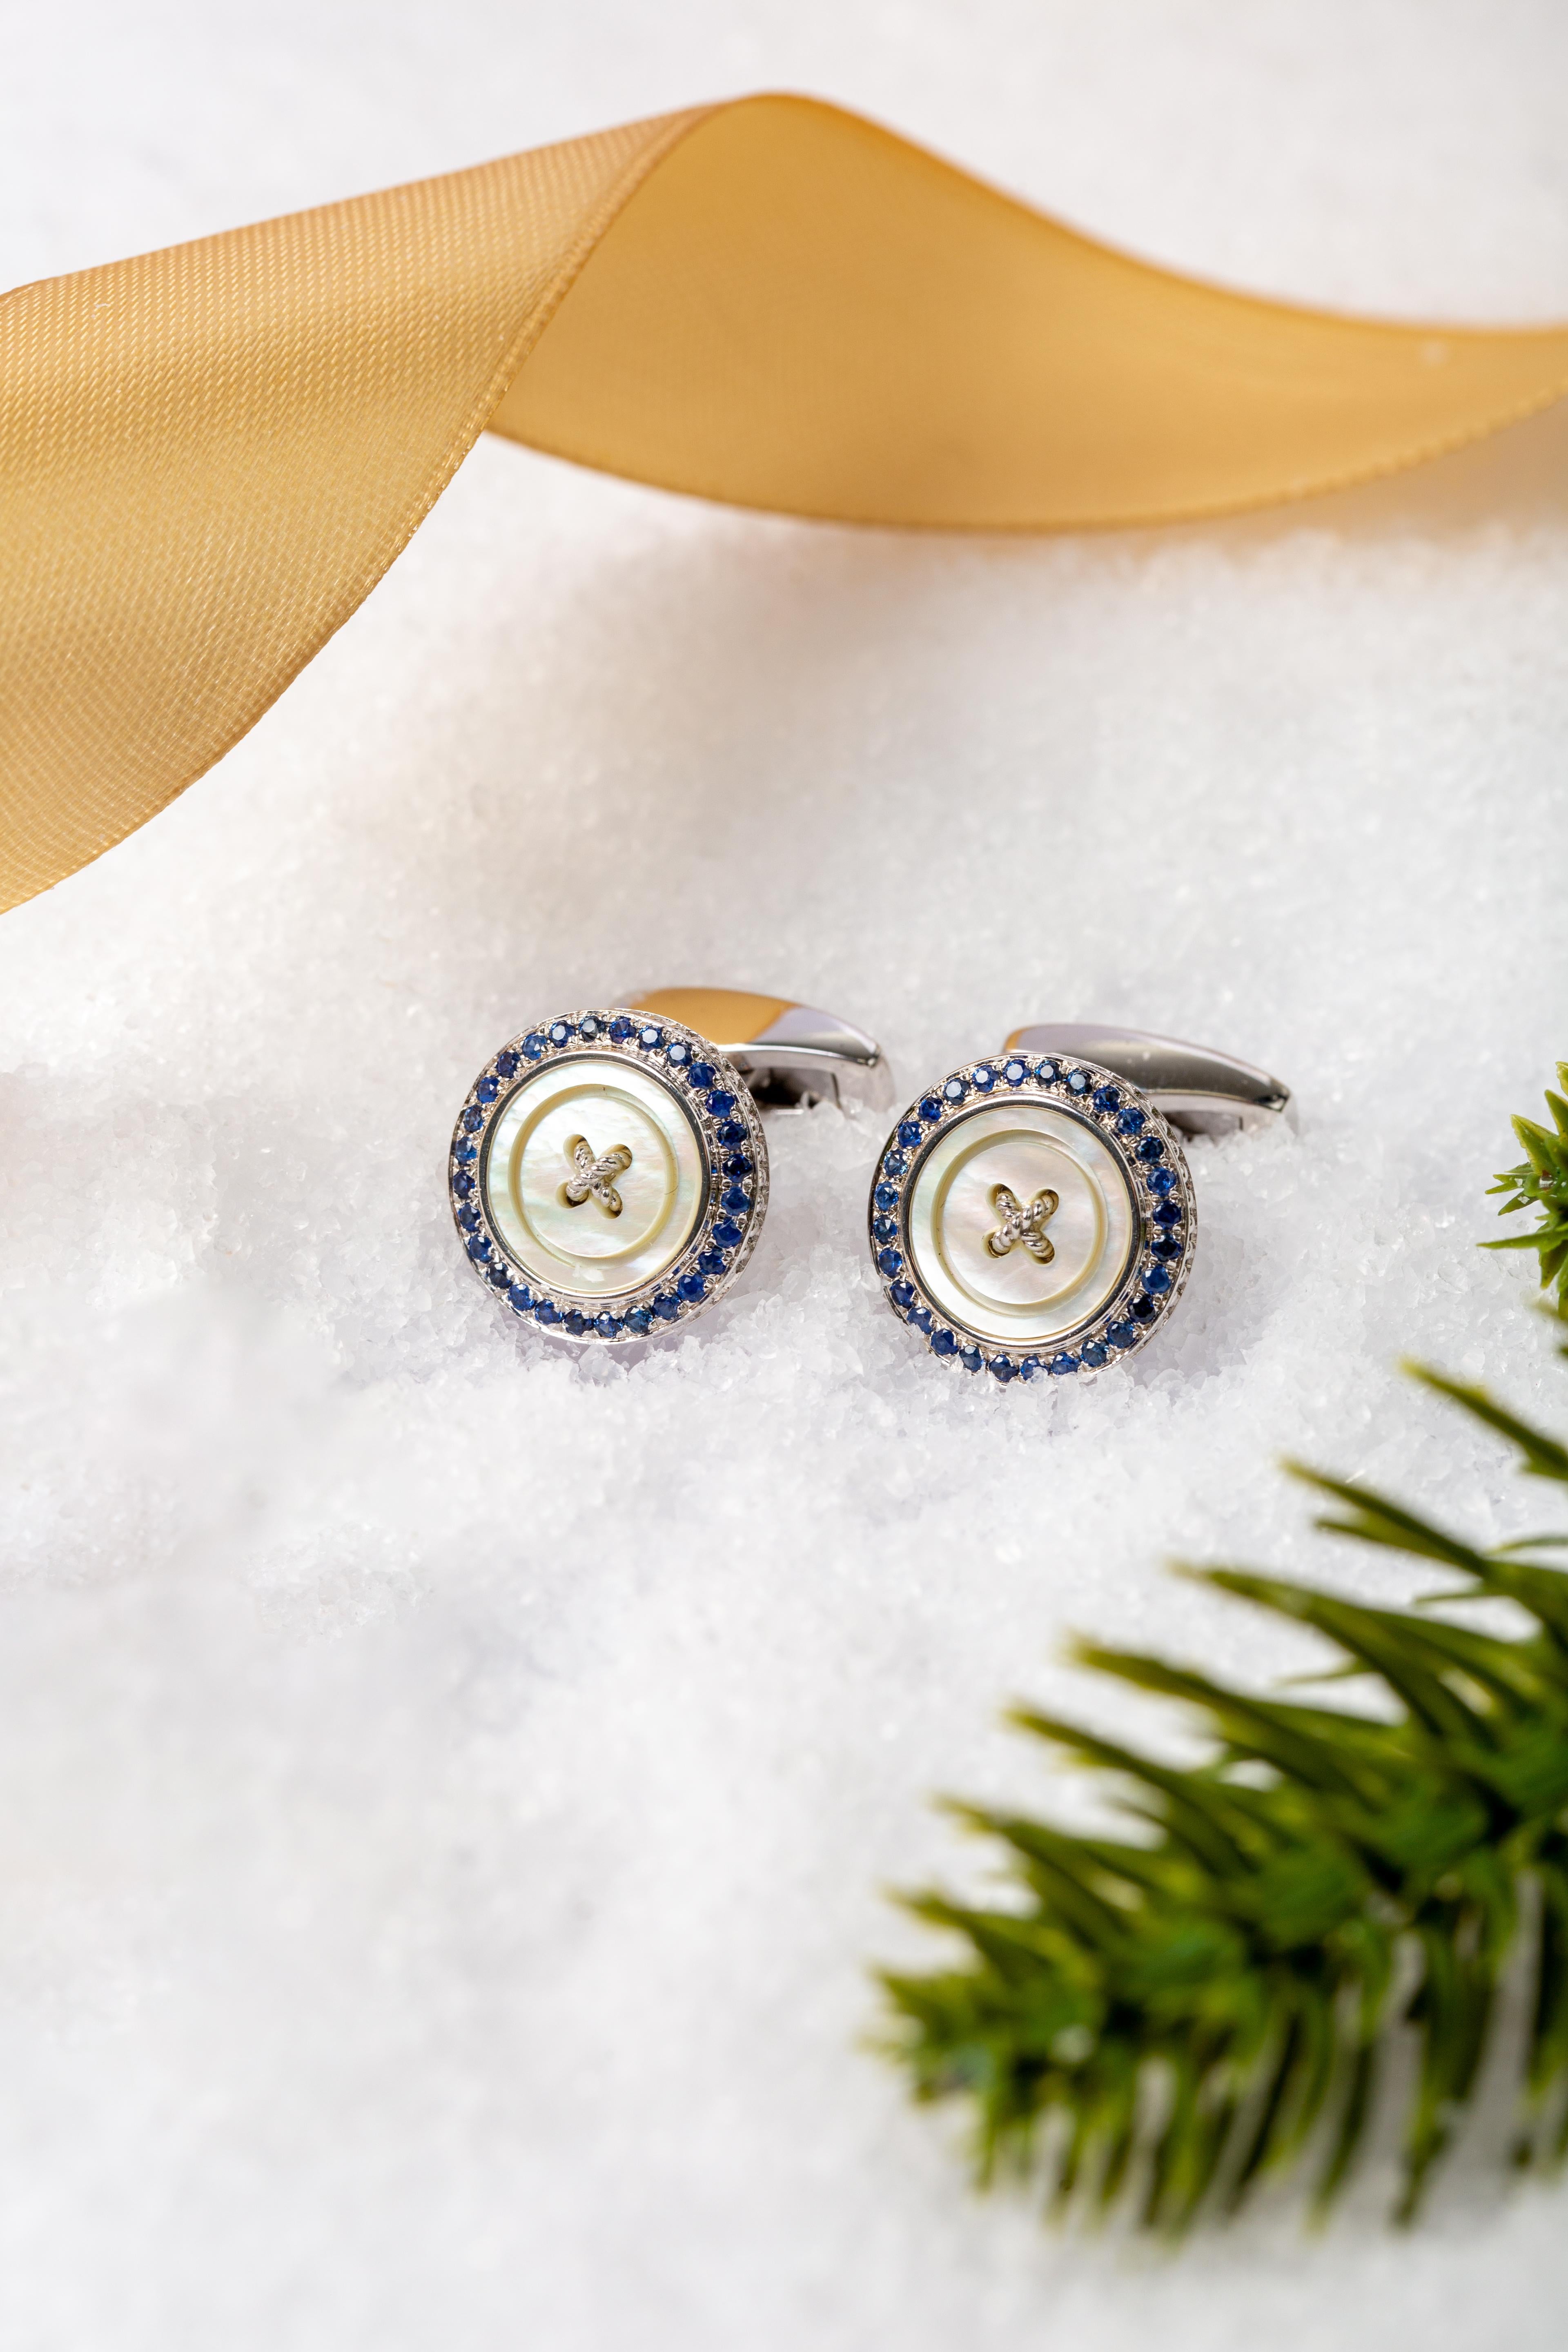 Precious Button Cufflinks with White Mother of Pearl & Sapphires

A luxurious reinvention of the classic tailoring button. This button is meticulously crafted from three materials, silver, semi-precious stone and precious rubies or sapphires. The